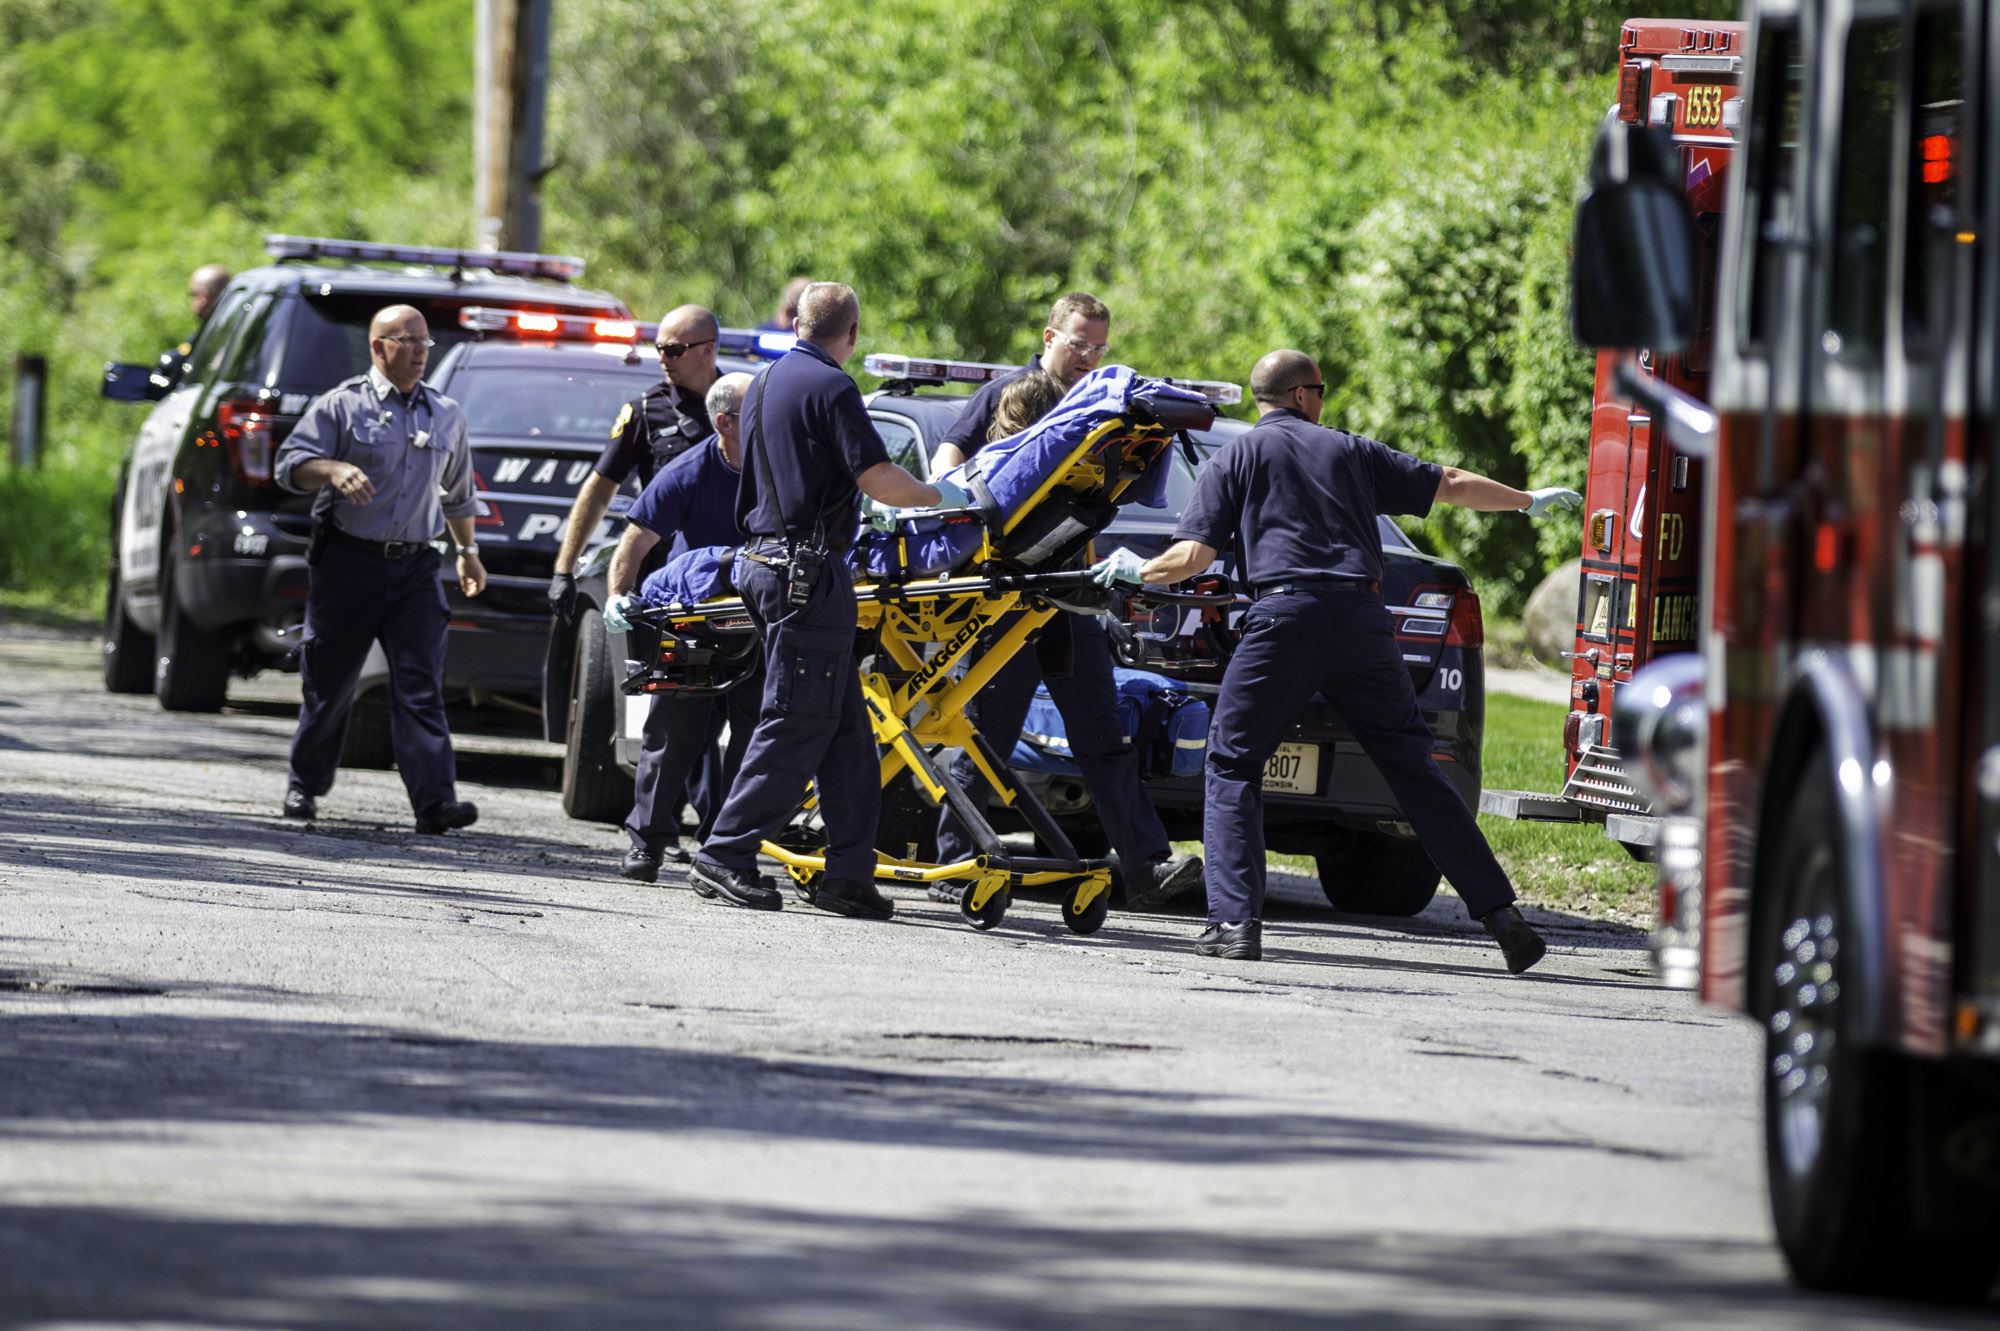 PHOTO: Rescue workers take a 12-year-old stabbing victim to an ambulance in Waukesha, Wis. after she was attacked by two 12-year-old-friends who claim they were inspired by a story they read online.